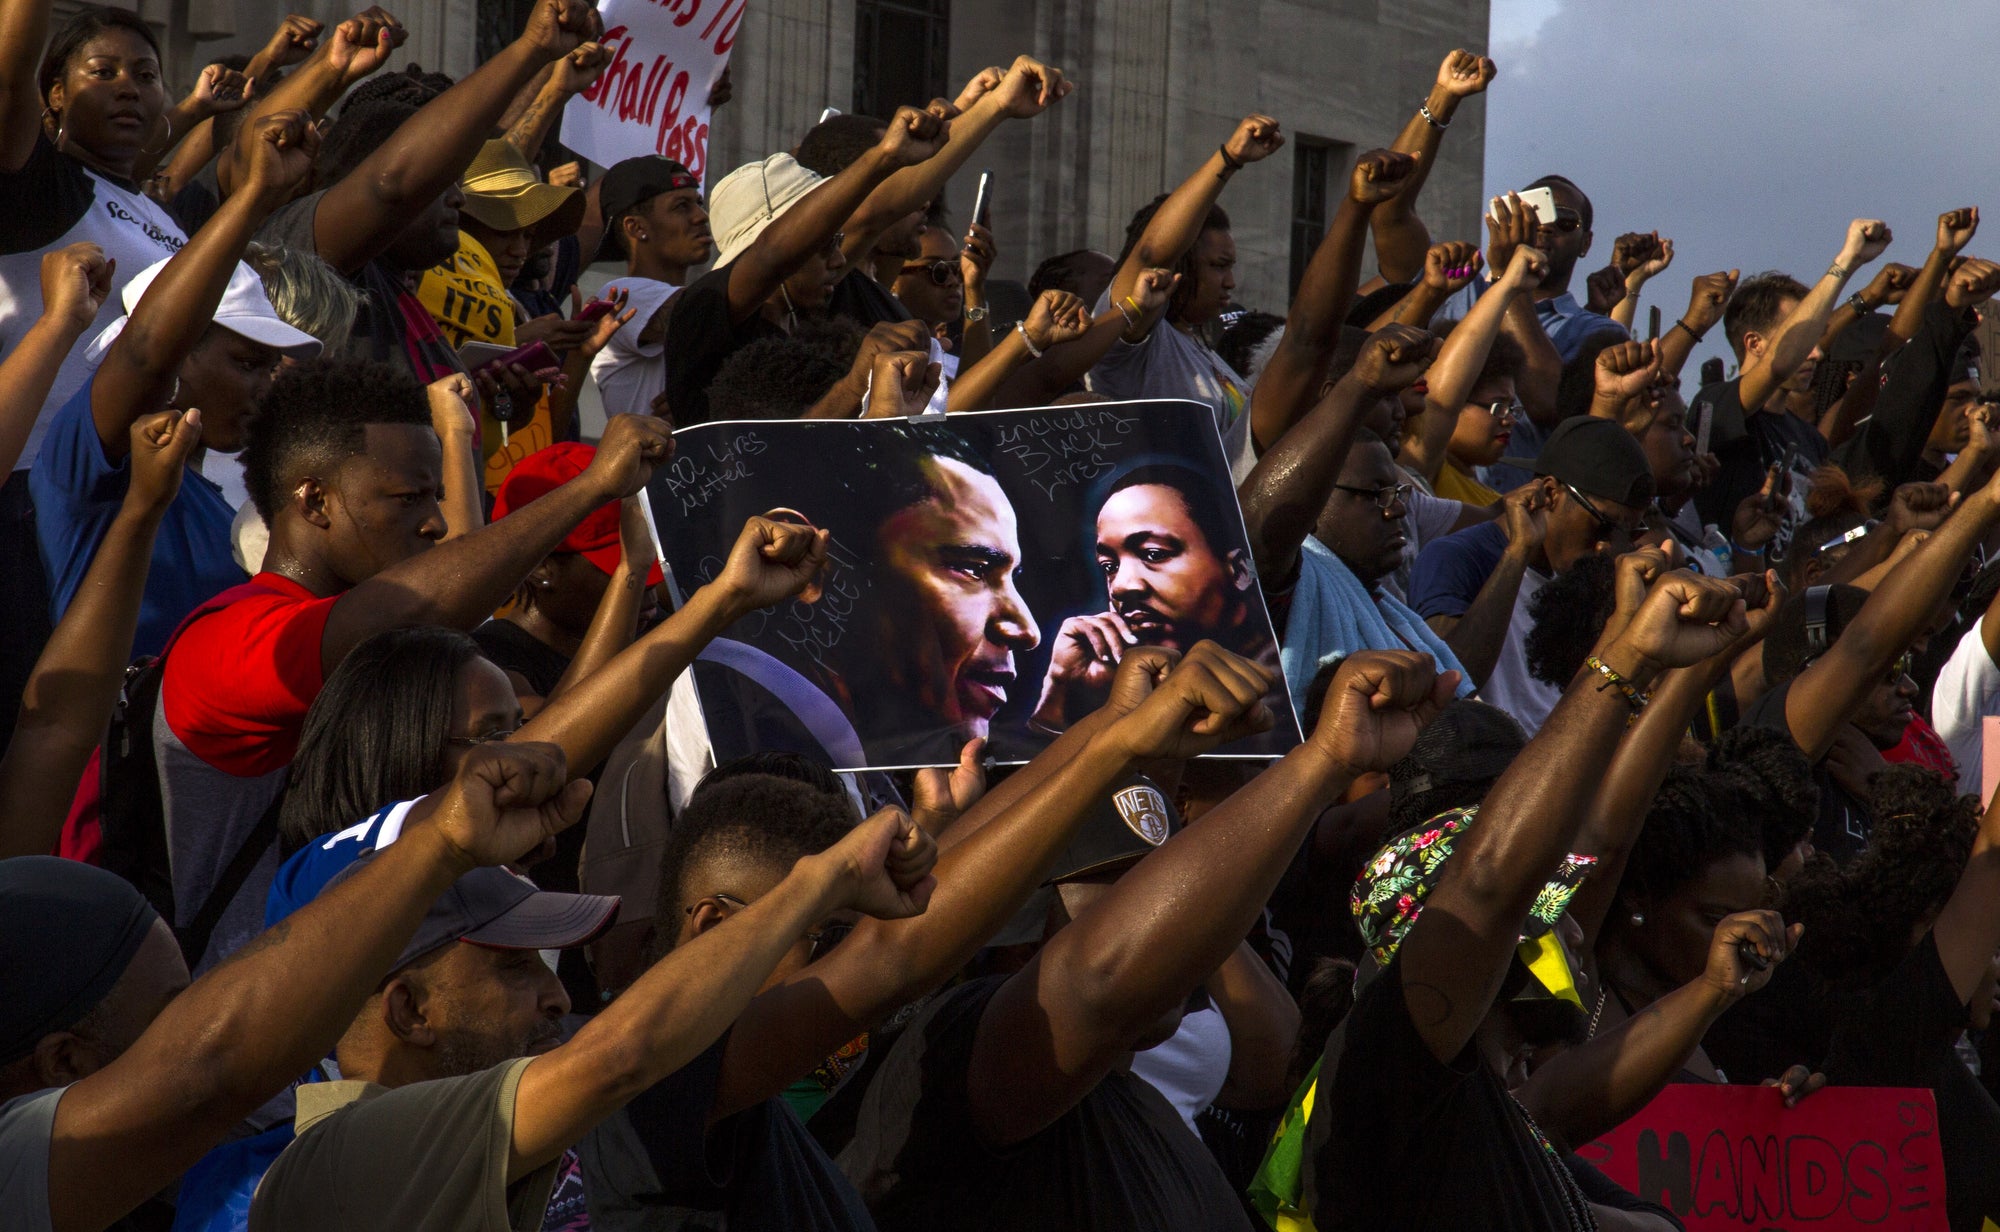 Demonstrators gather after marching at the Louisiana Capitol to protest the shooting of Alton Sterling on July 9, 2016 in Baton Rouge, Louisiana.